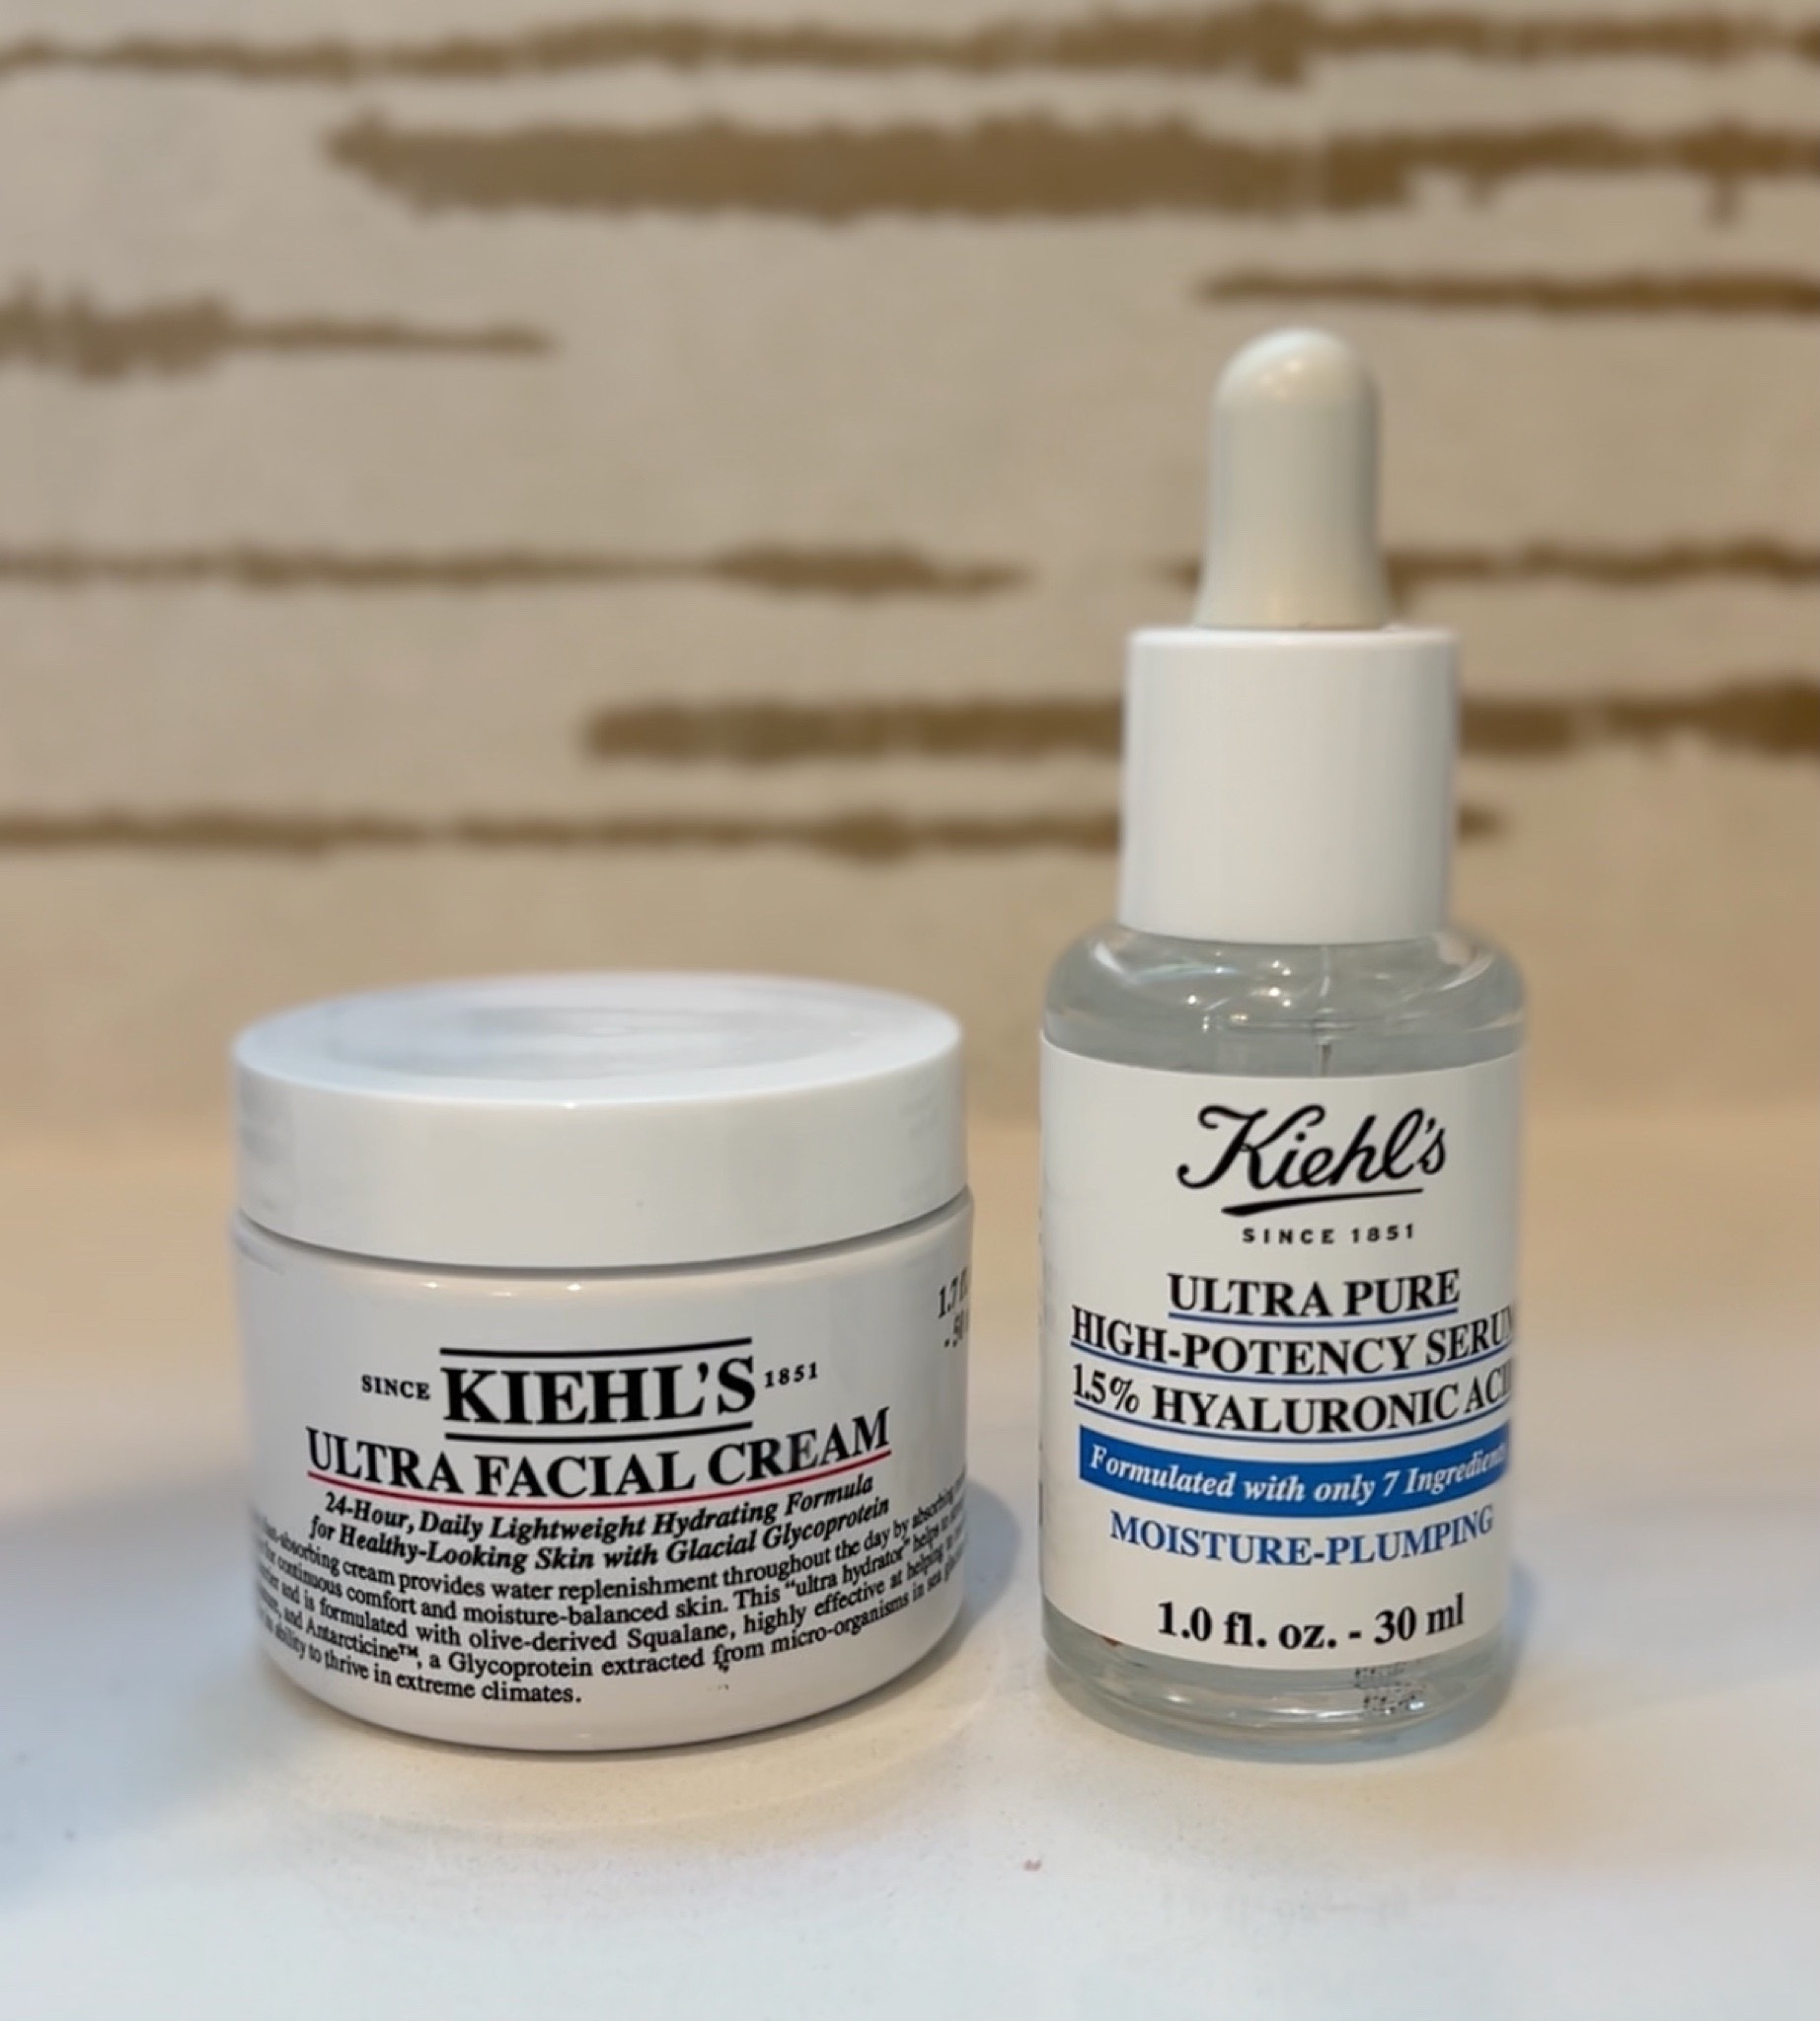 Ultra Facial Refillable Moisturizing Cream with Squalane - Kiehl's